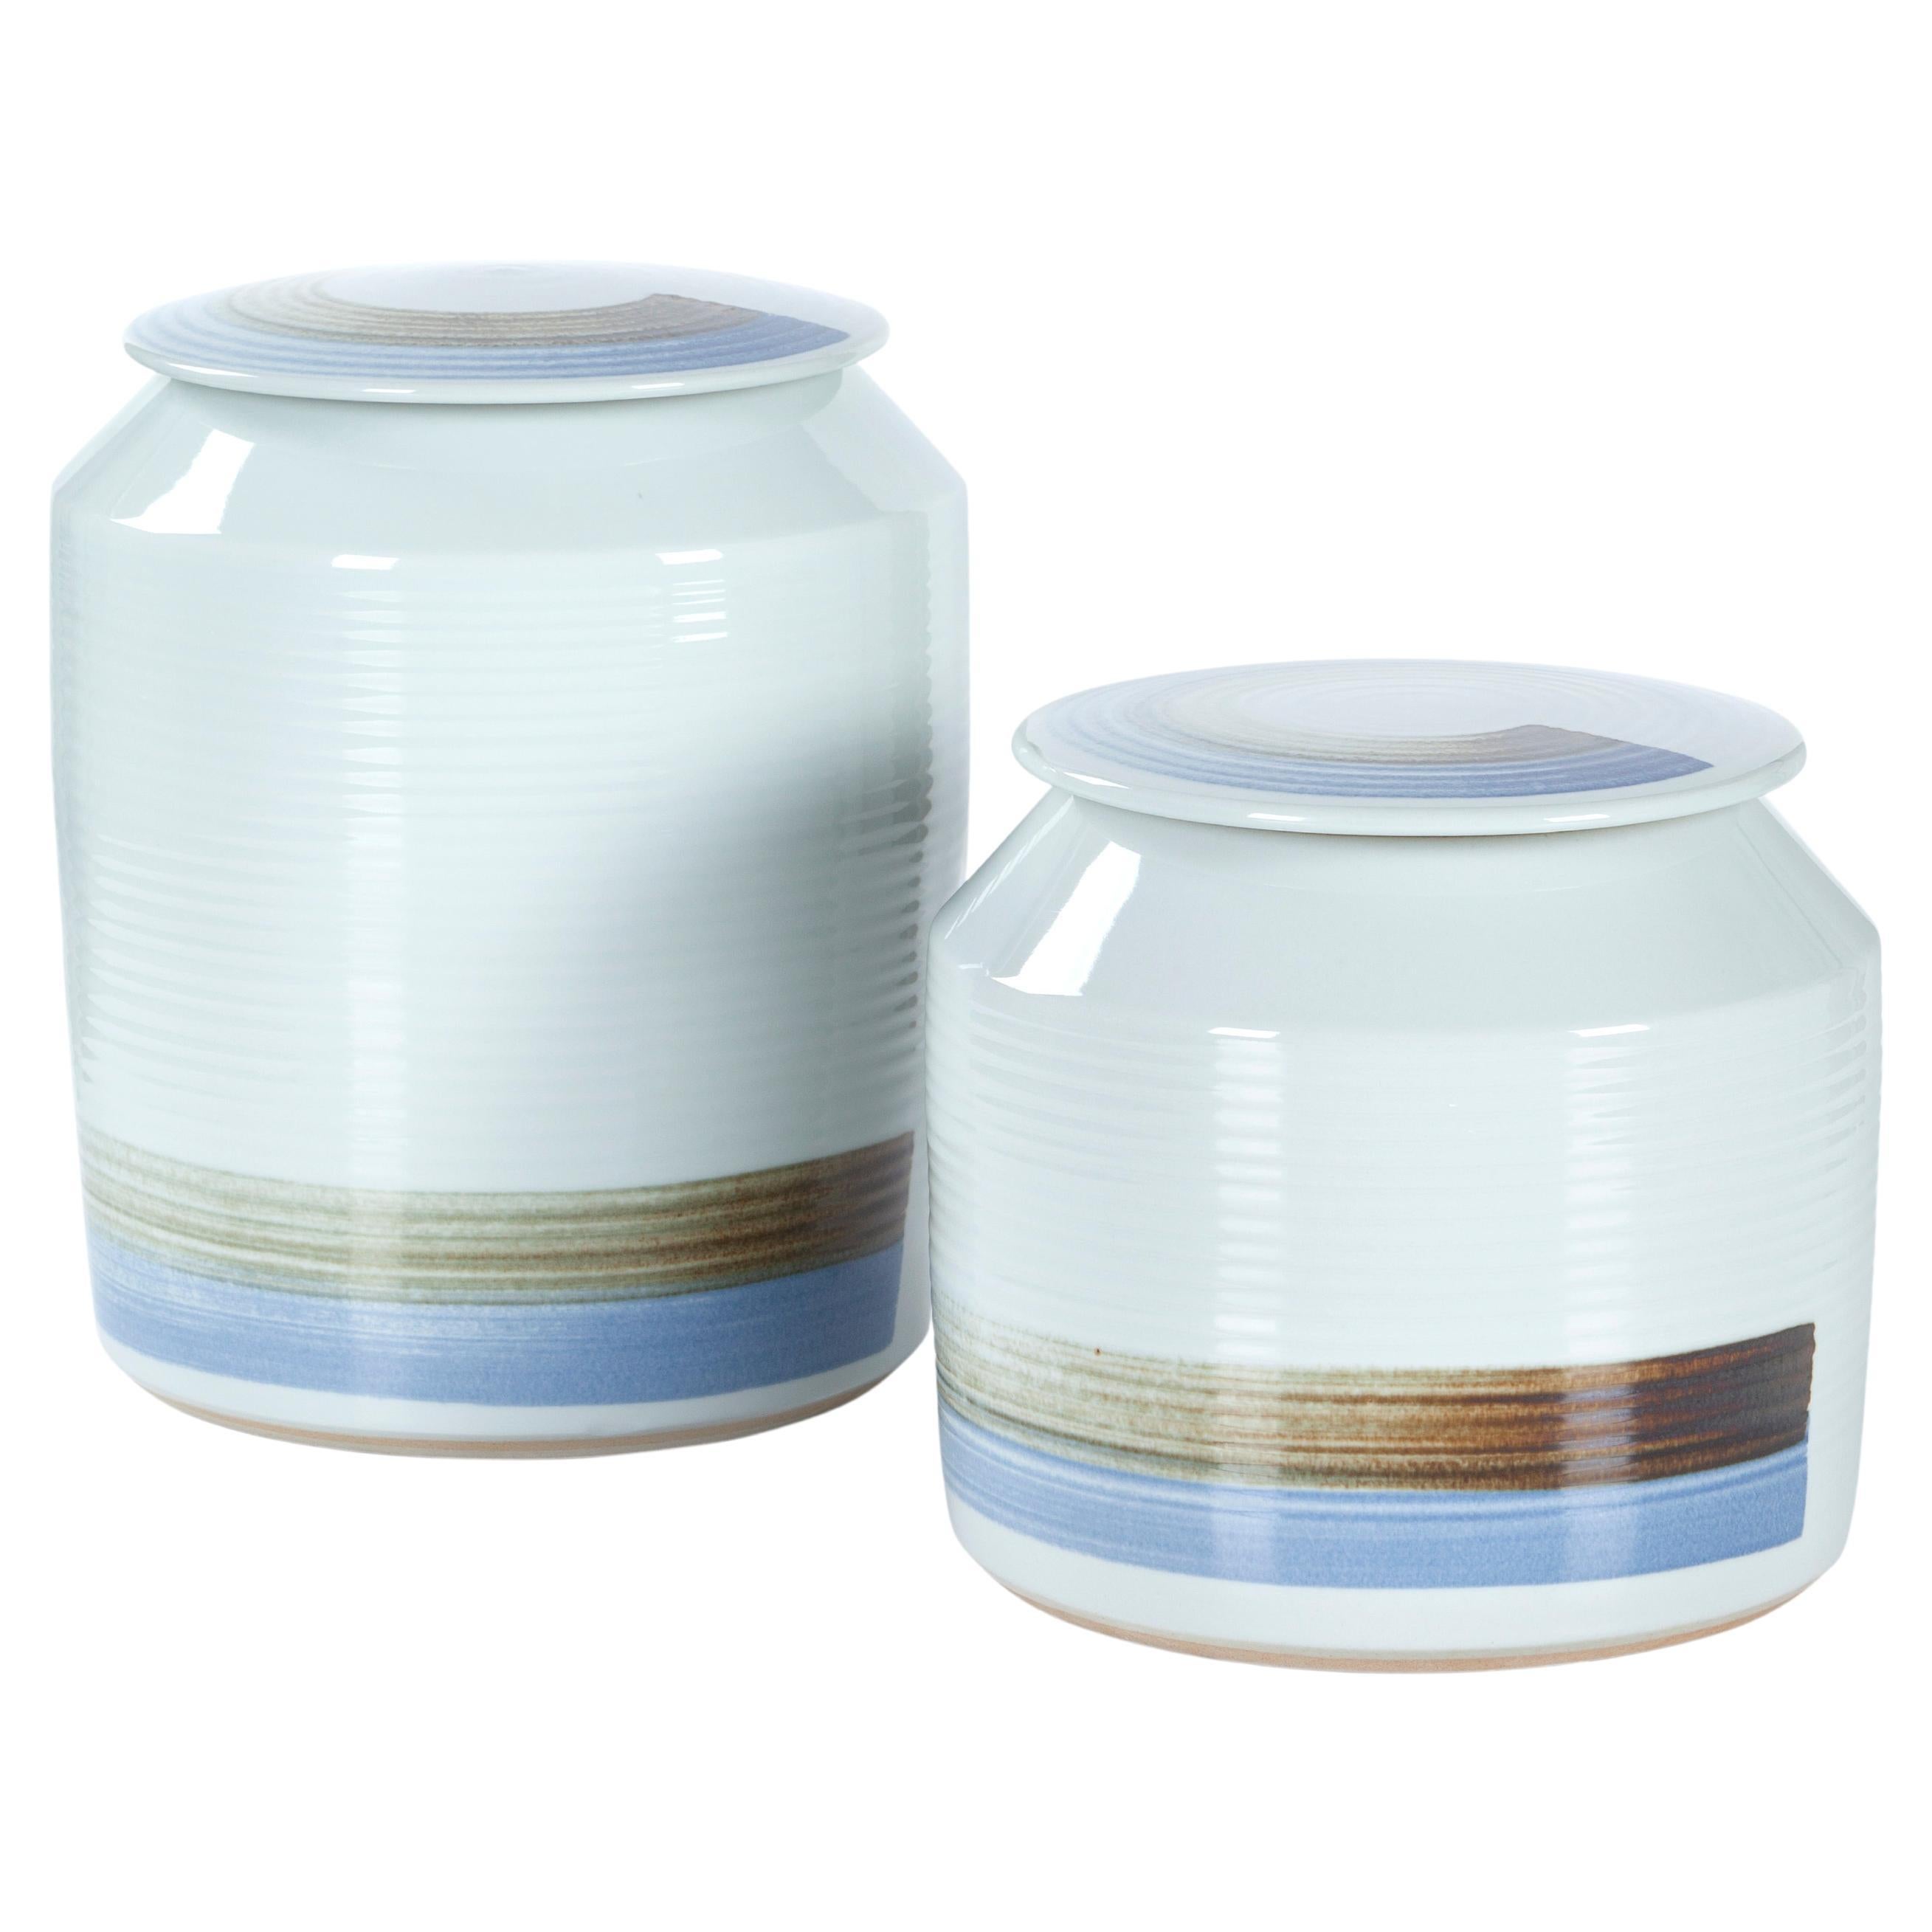 Set of 2 Porcelain Jin Pots, Blue White and Brown, Handmolded & Handpainted For Sale